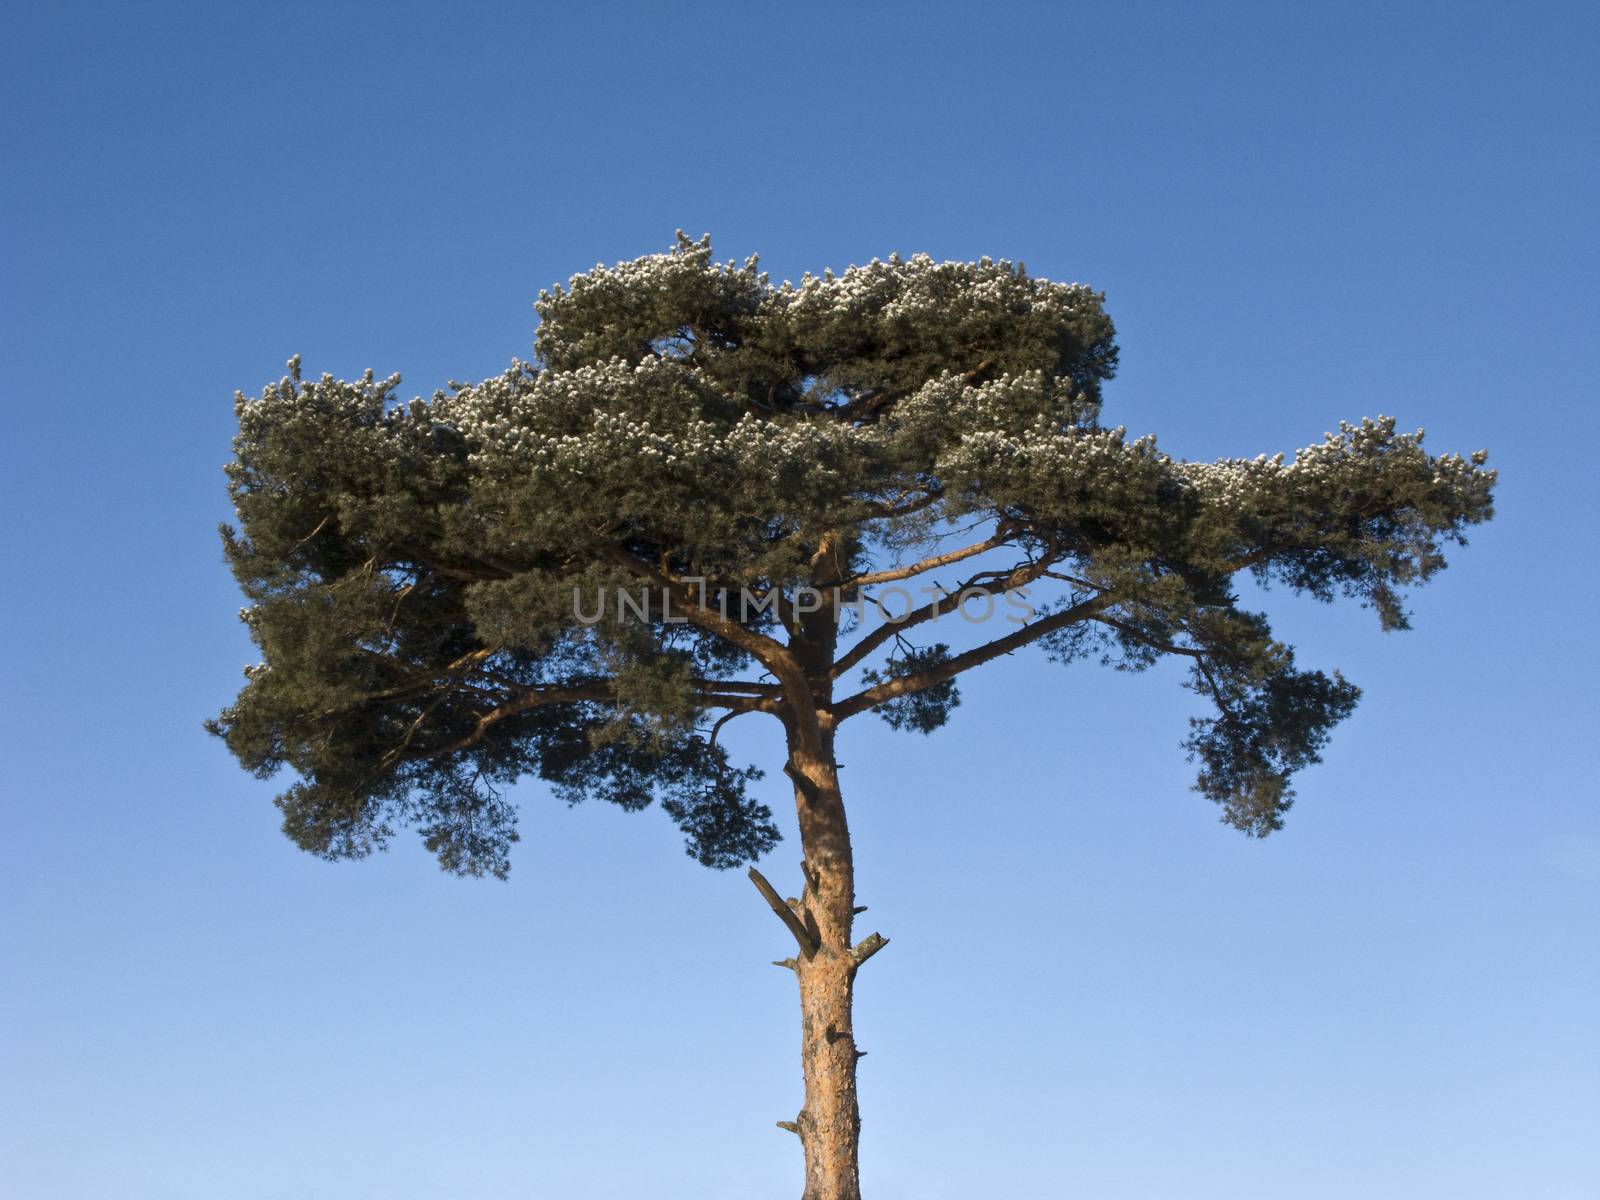 Top of pine tree in winter wood on sky background